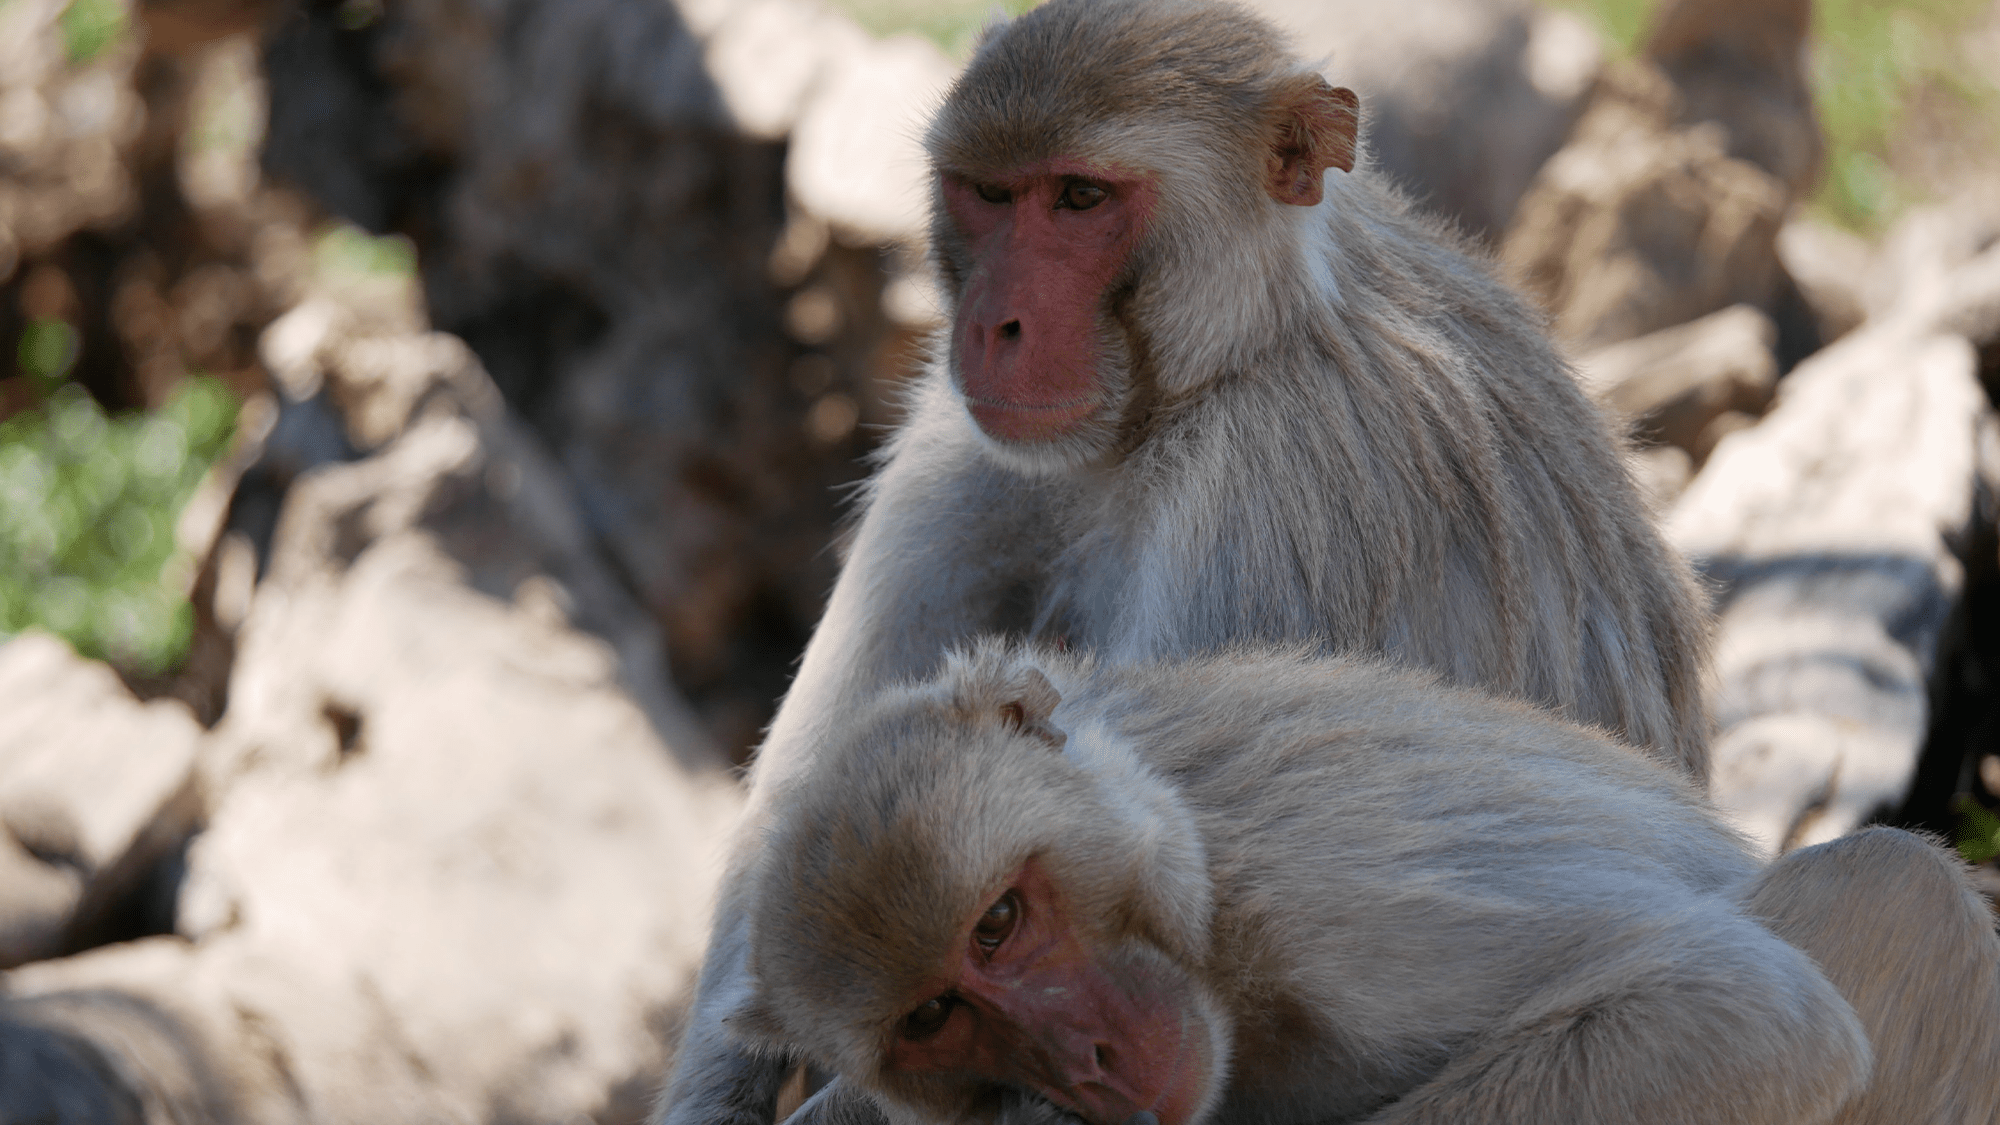 Same-sex mounting in male macaques can help them reproduce more successfully